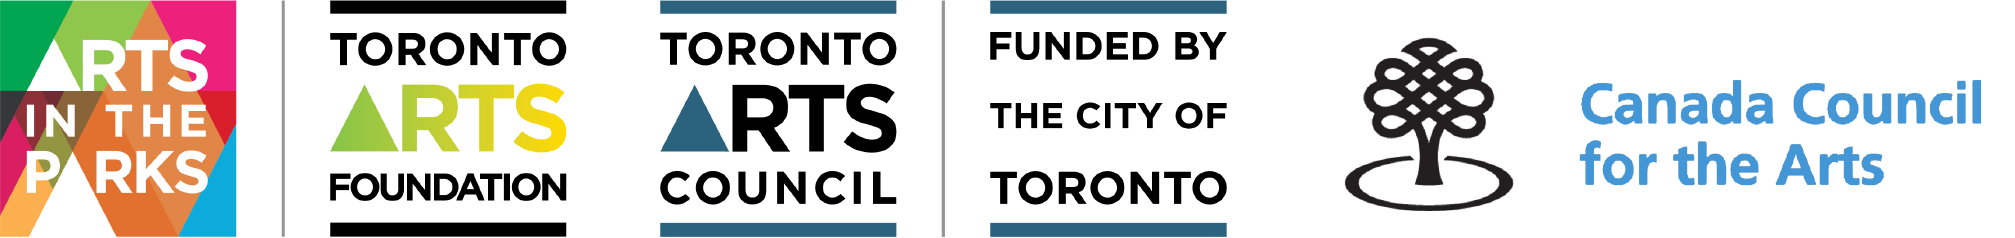 Arts in the Parks logo, Toronto Arts Foundation logo, Toronto Arts Council Funded by the City of Toronto logo in a row